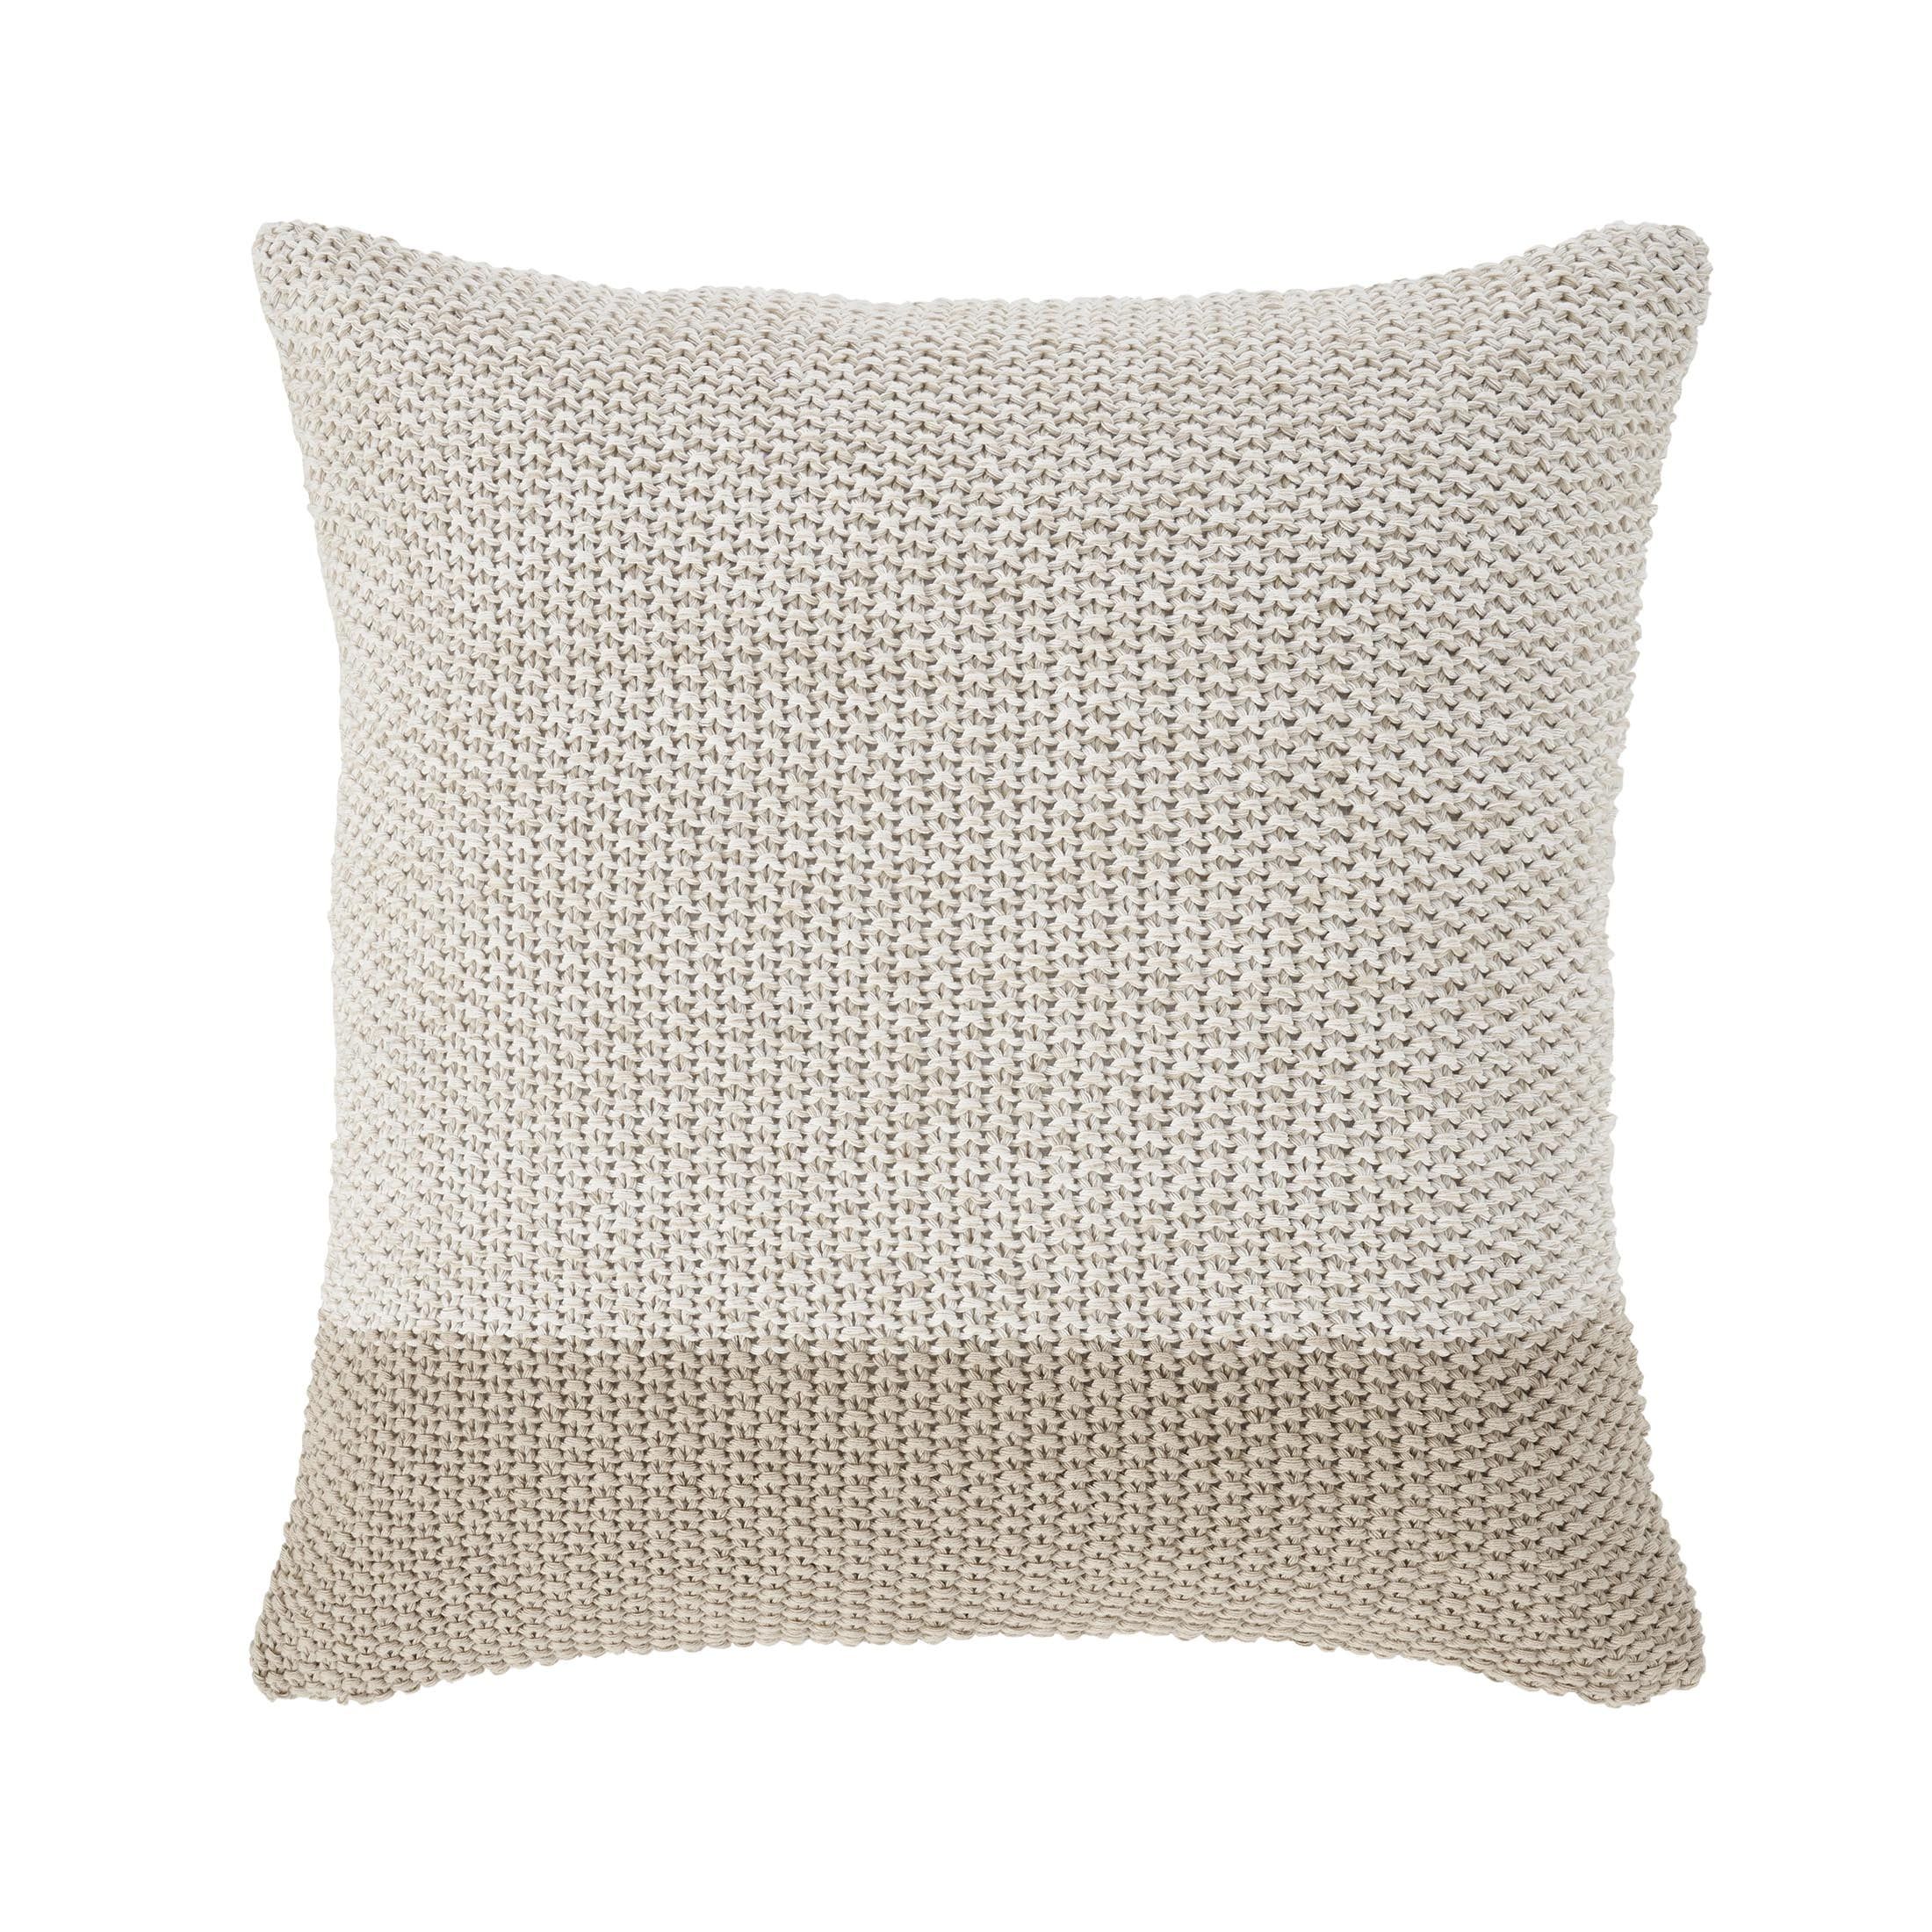 My Texas House Cassia Sweater Knit Square Decorative Pillow Cover, 18" x 18", Ivory | Walmart (US)